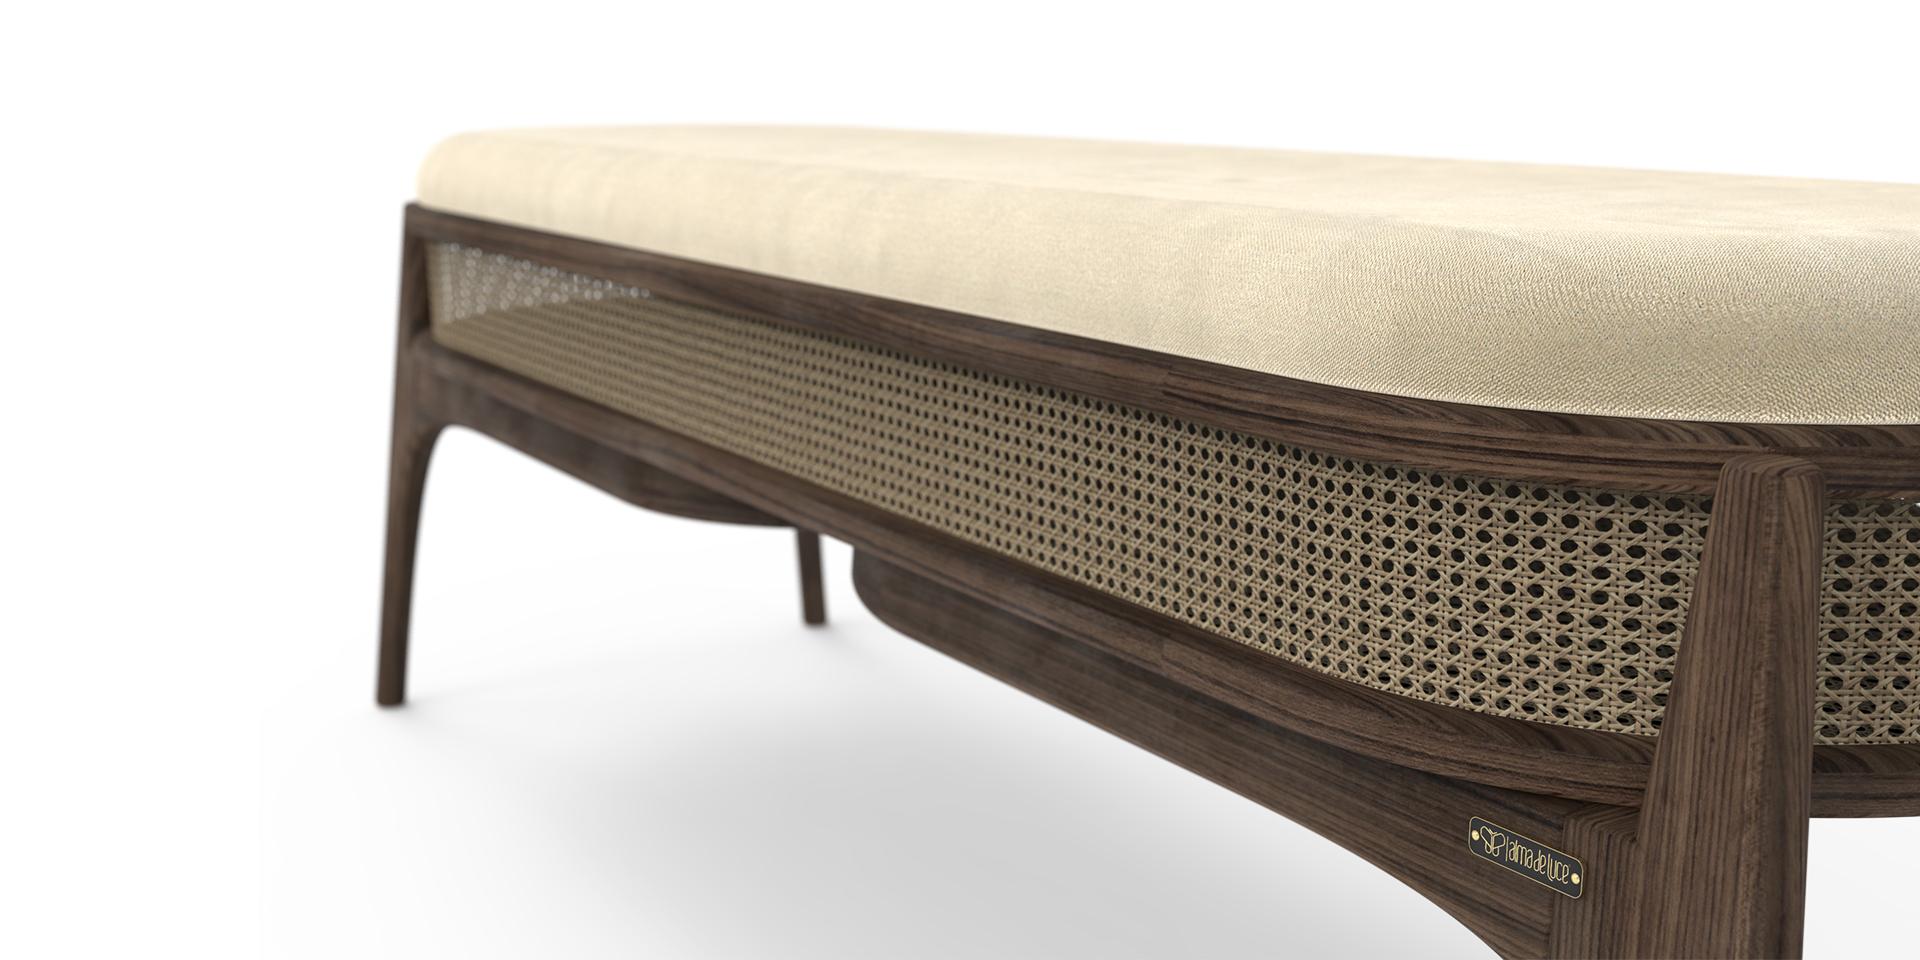 Mudhif bench features a structure in solid walnut wood and natural leather that gives it a sober and elegant look.
Need the perfect piece for your luxury living room decor? You just found it!